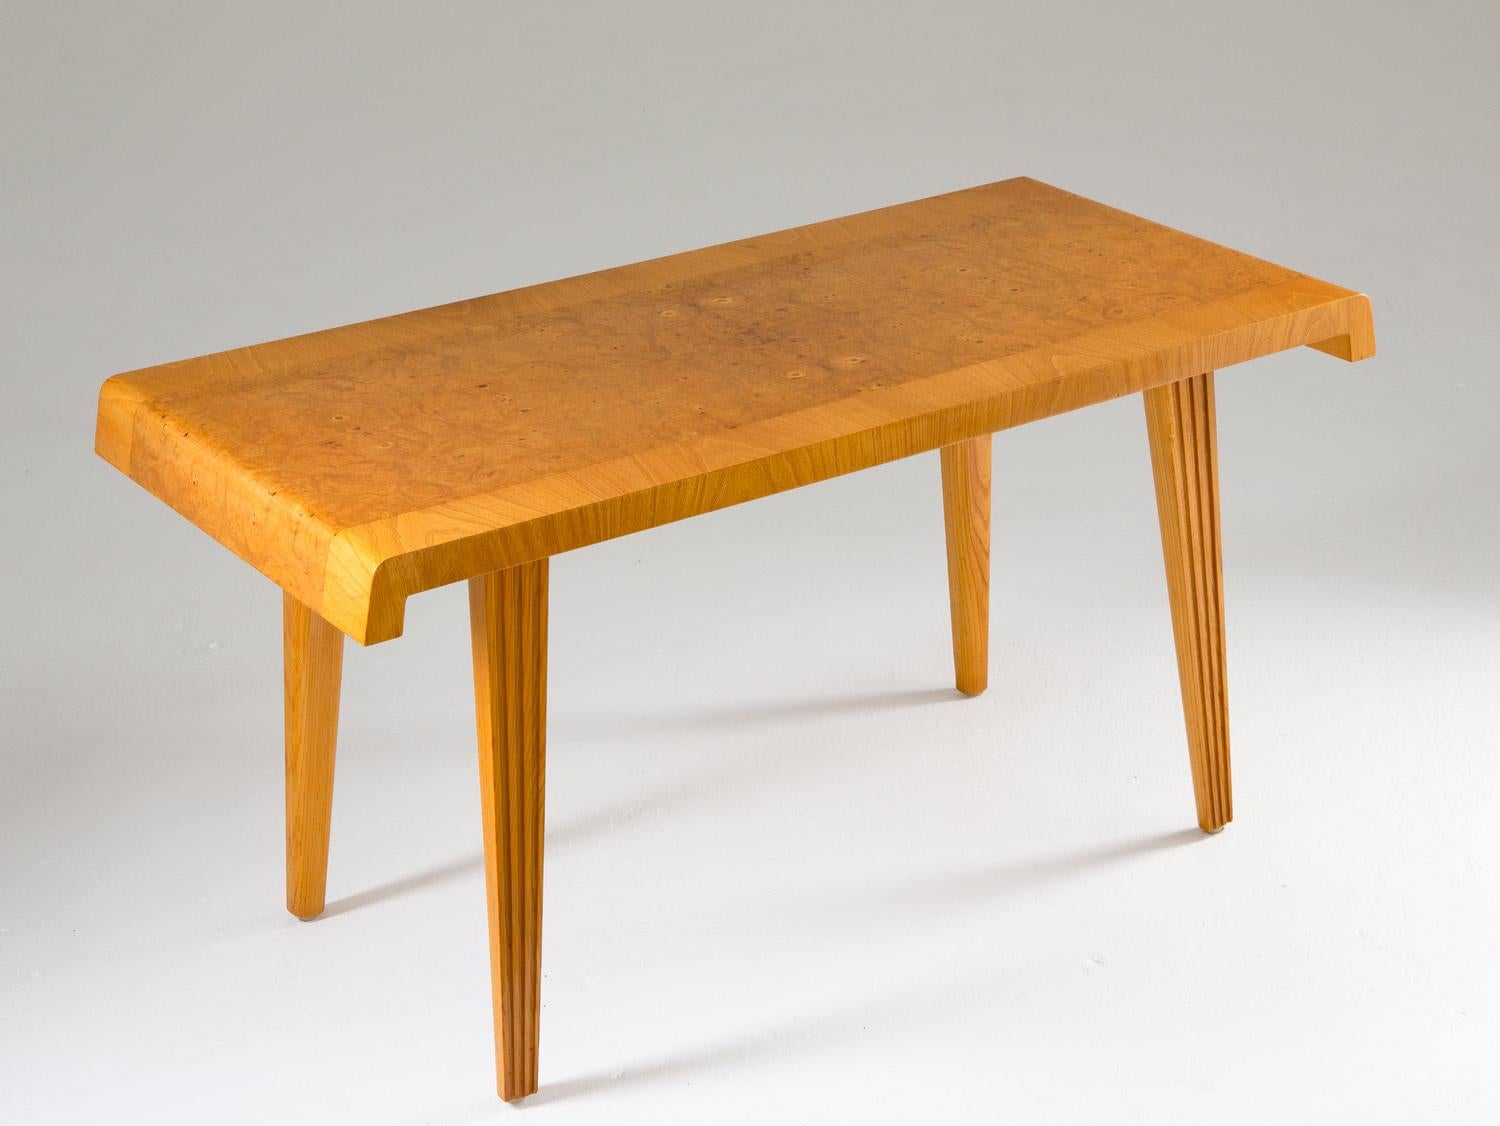 Swedish Modern Coffee Table, 1940s In Good Condition For Sale In Karlstad, SE